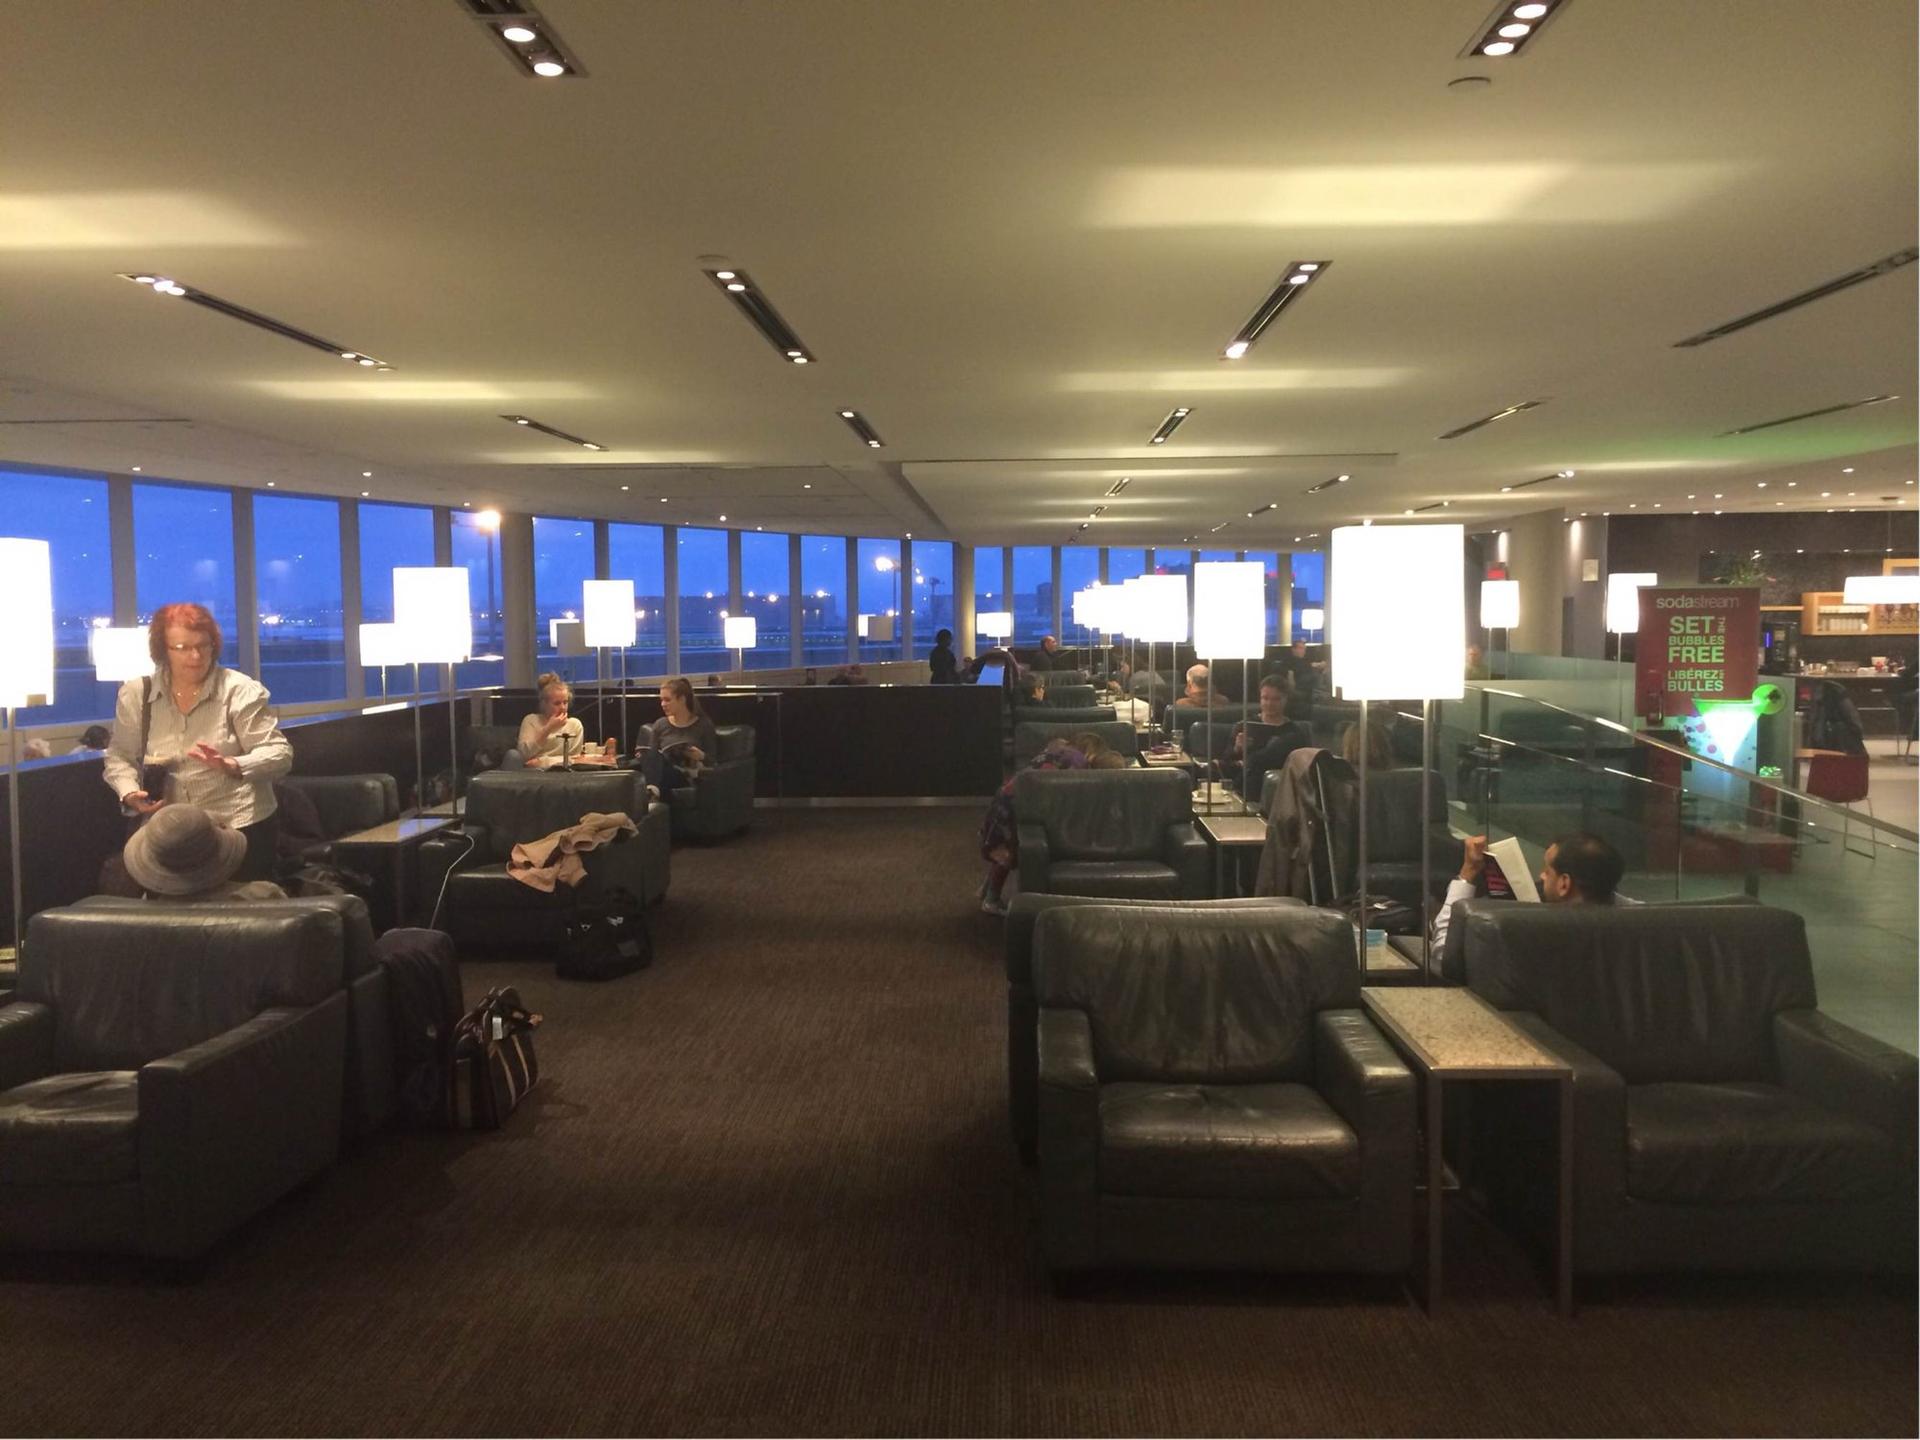 Air Canada Maple Leaf Lounge image 7 of 21